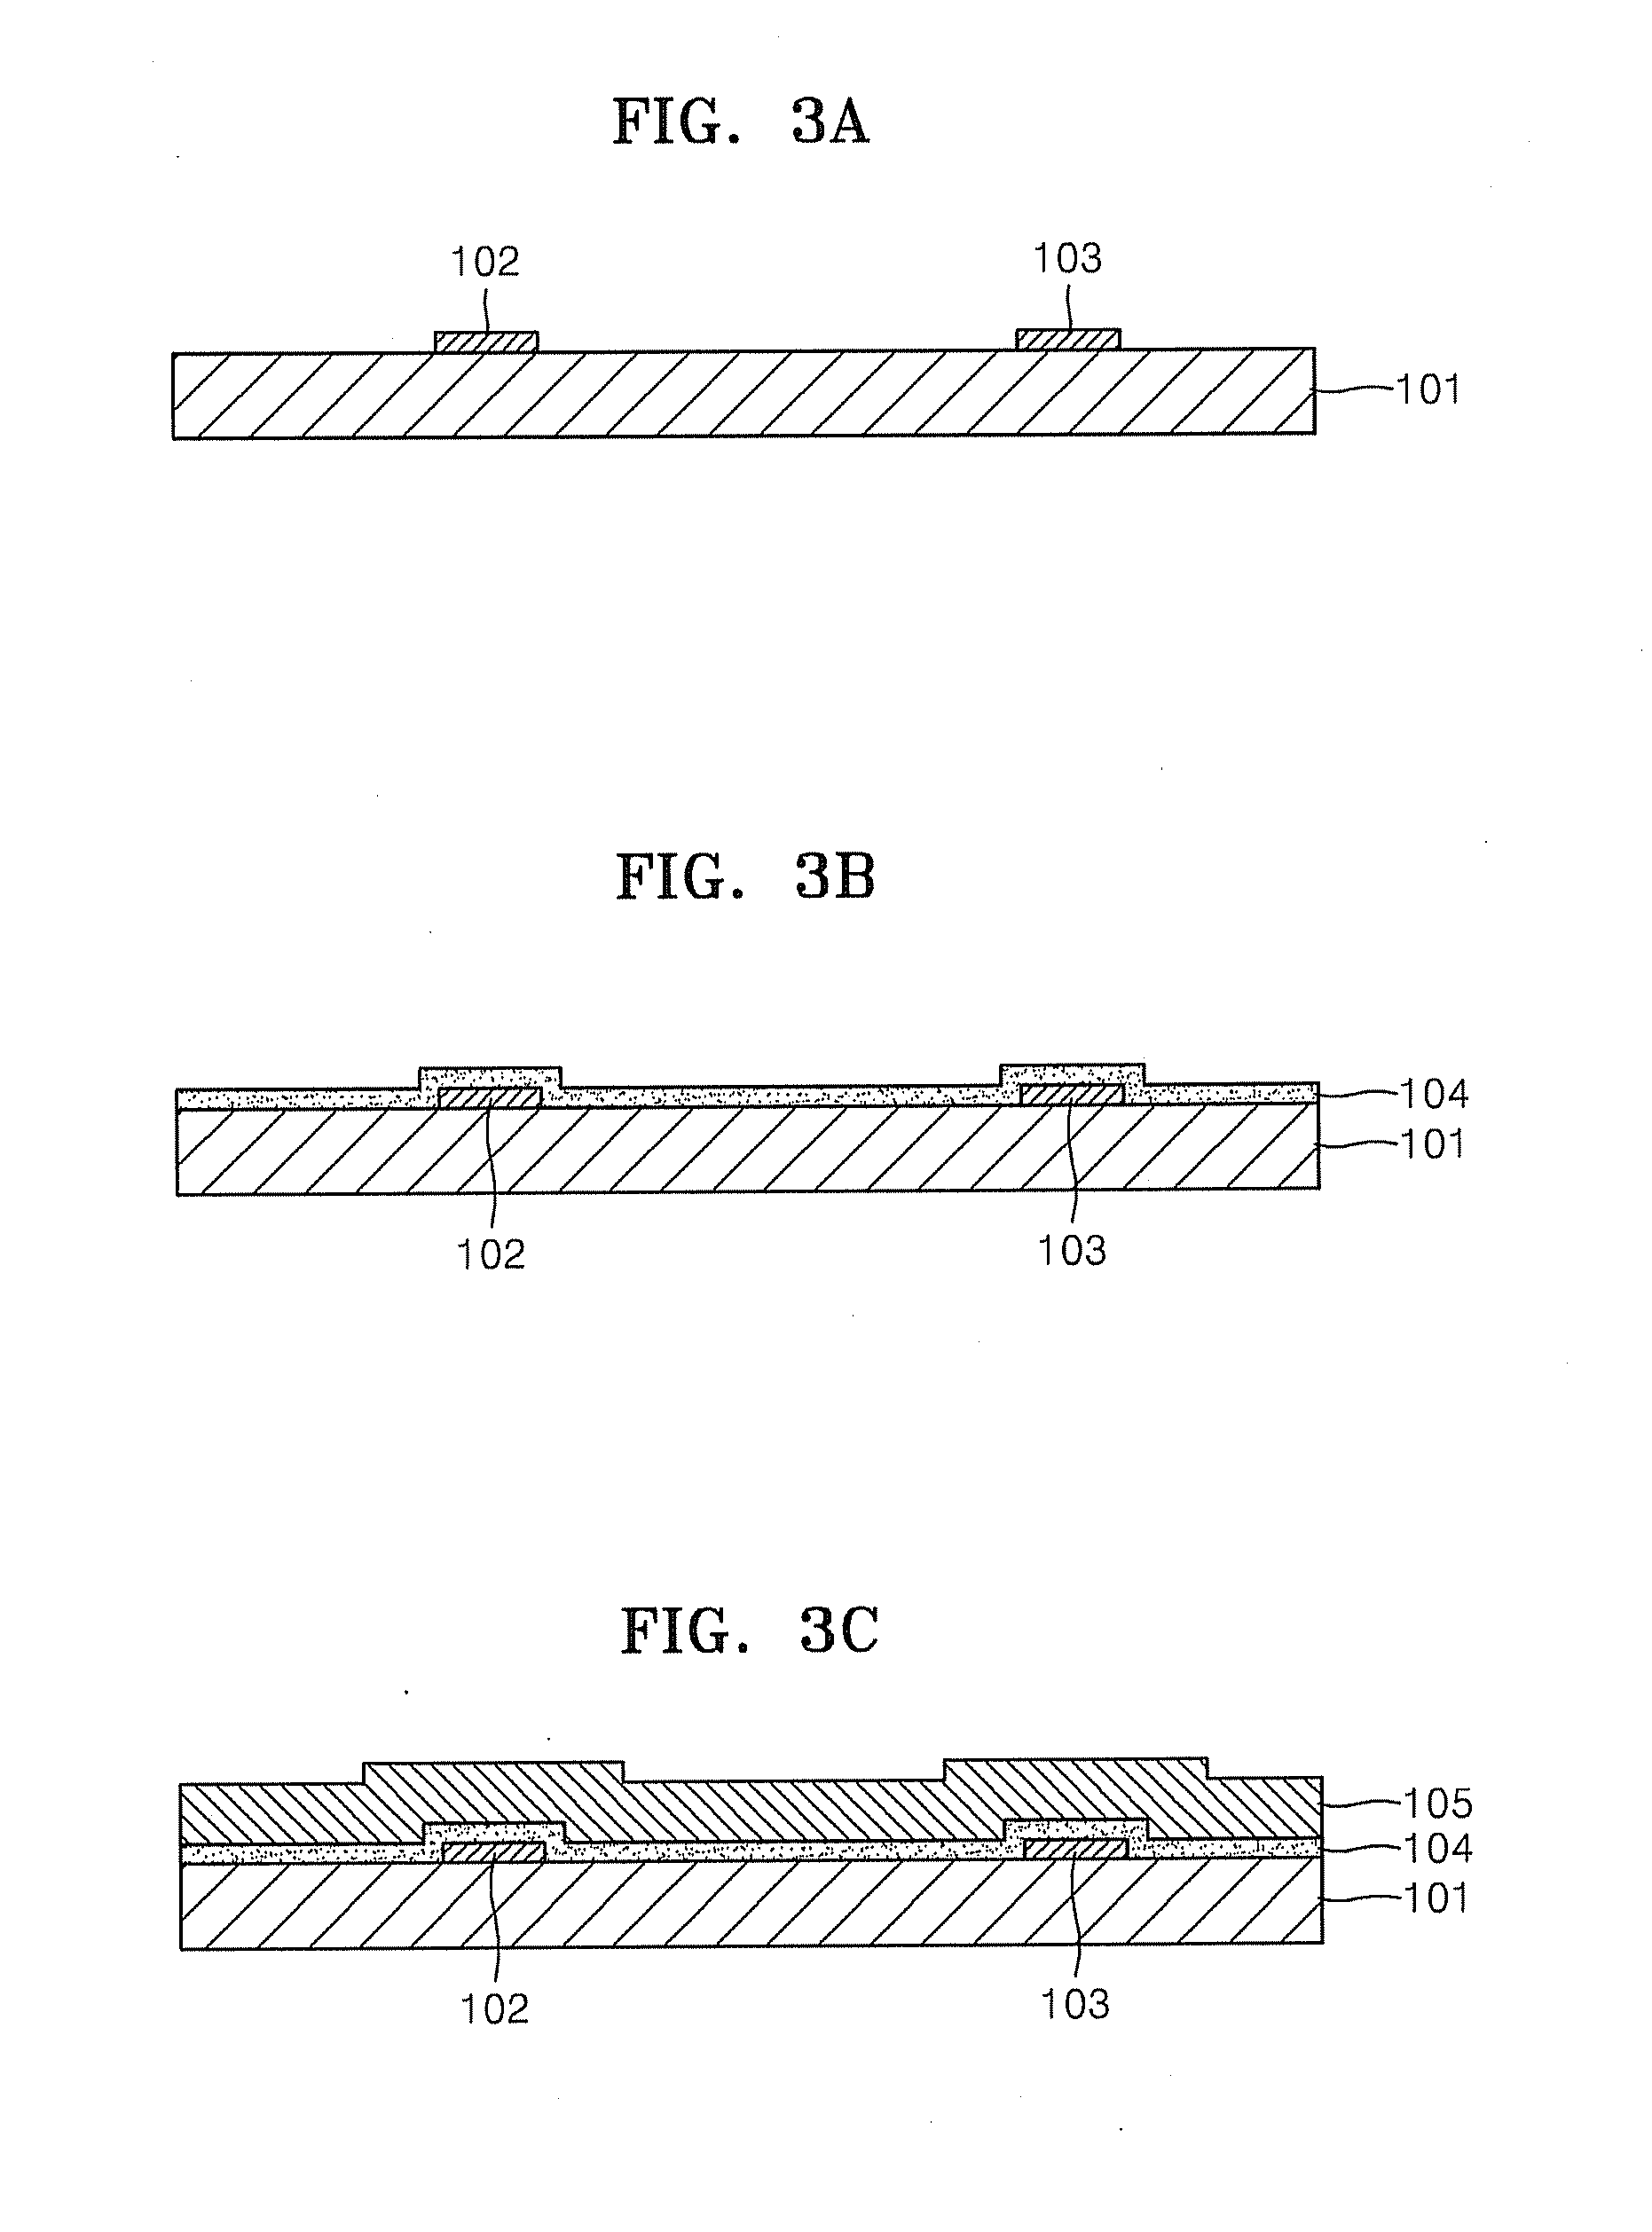 Light Sensing Circuit, Method Of Manufacturing The Same, And Optical Touch Panel Including The Light Sensing Circuit